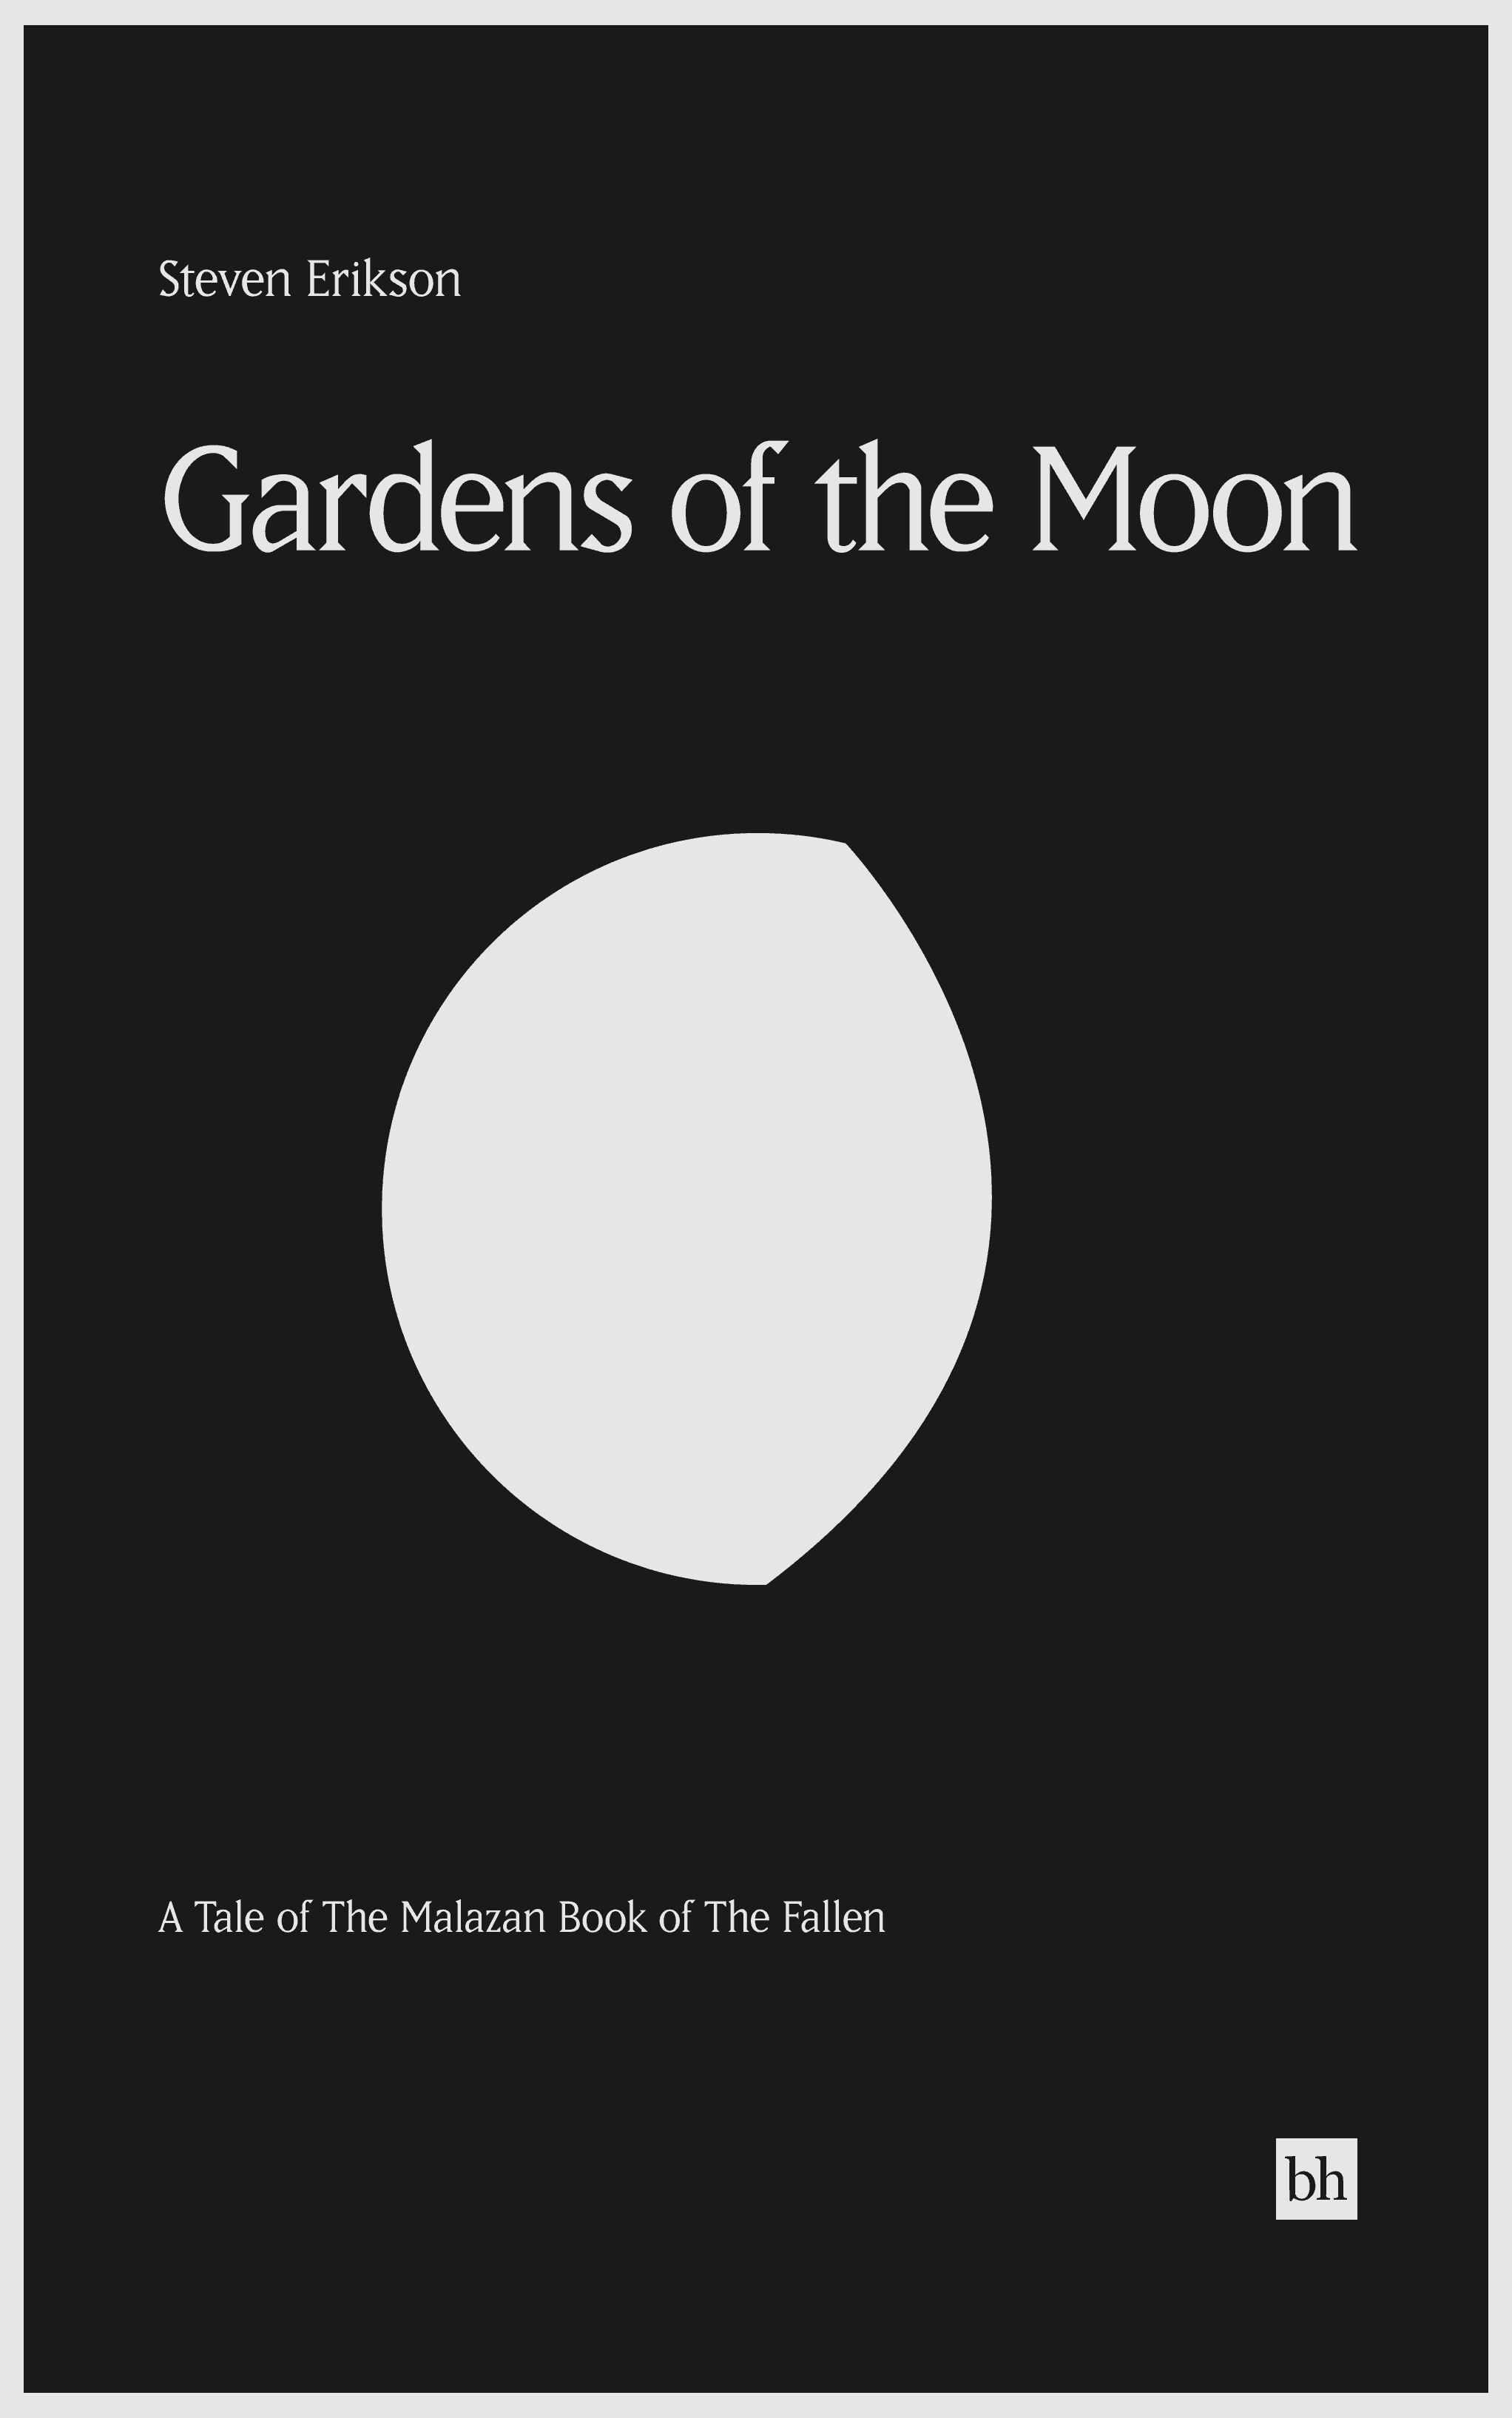 Gardens of The Moon by Steven Erikson